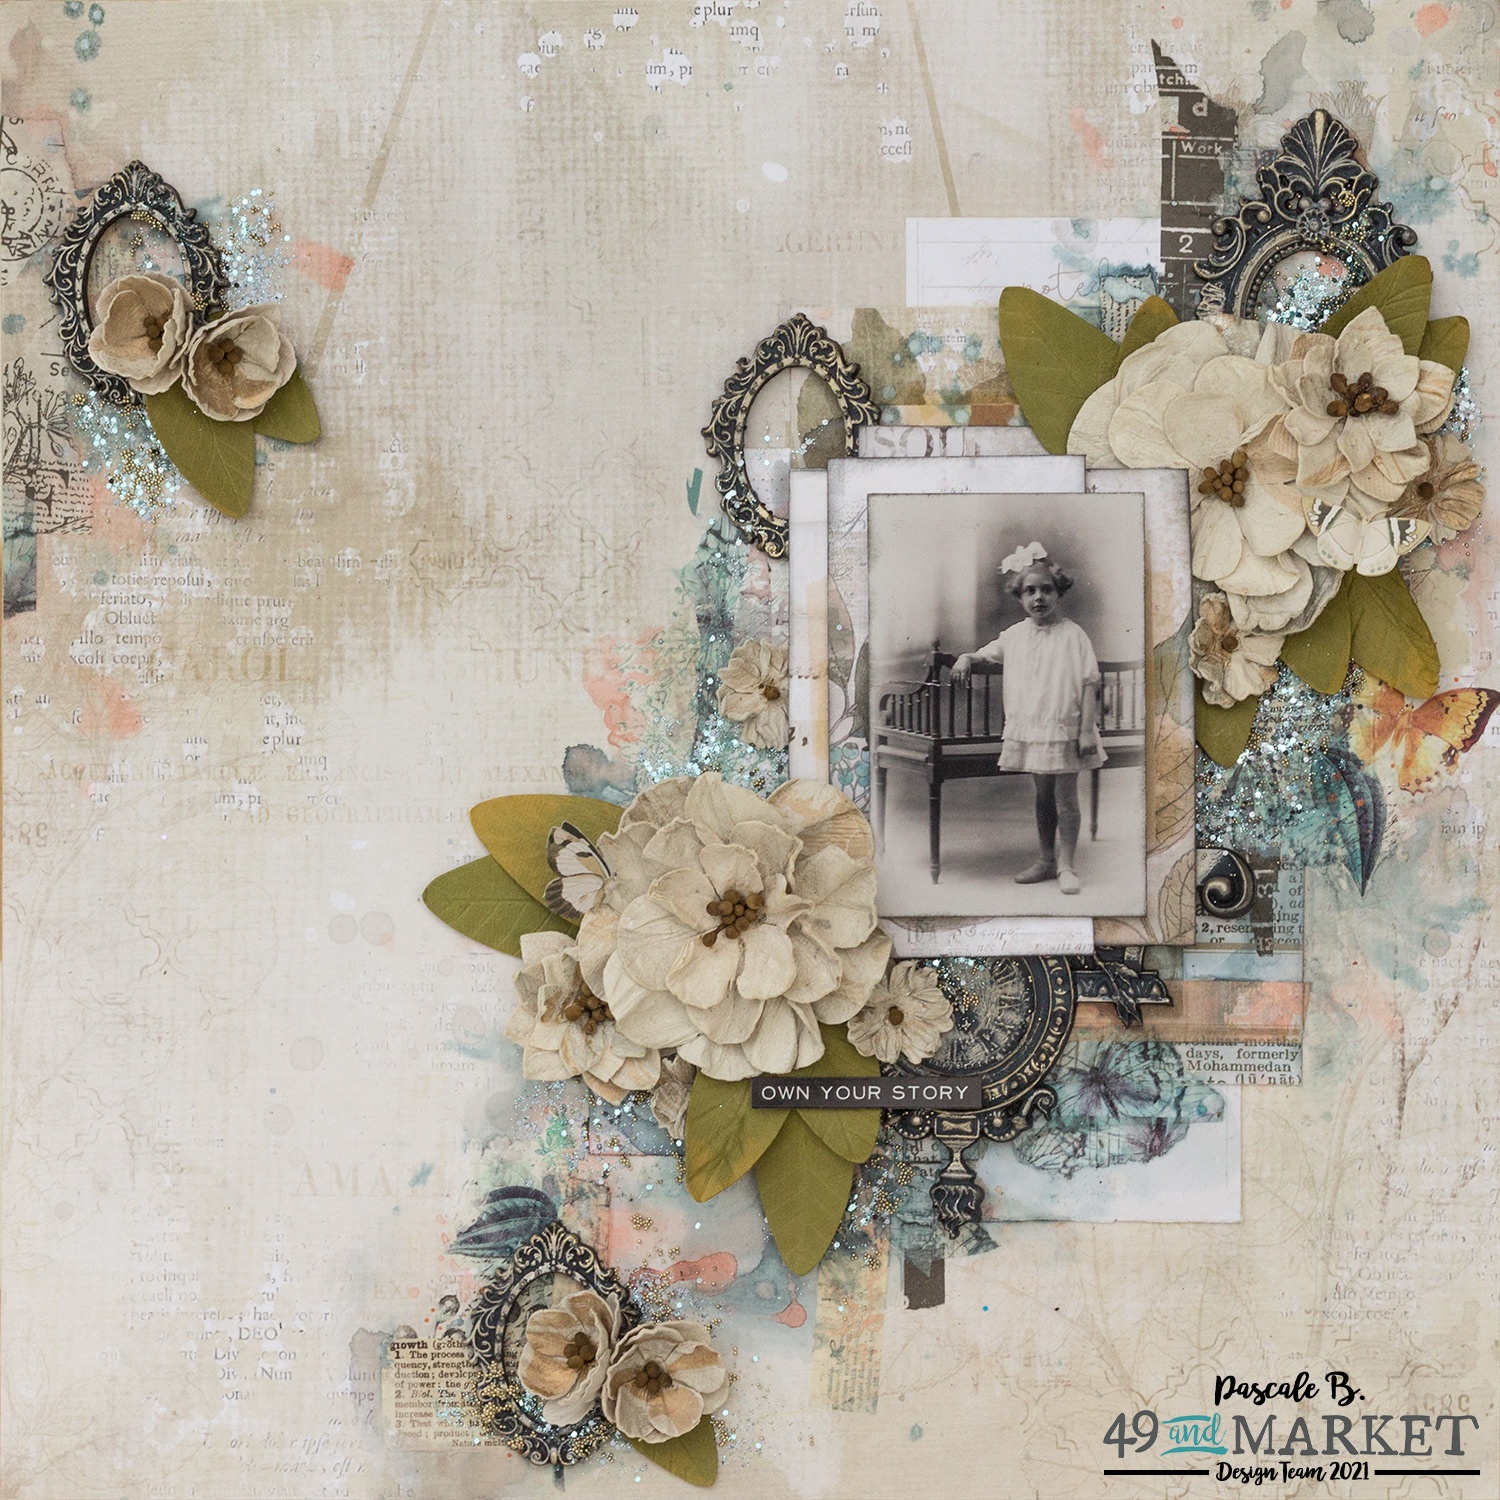 Own your story - Mixed media layout by Pascale B. 